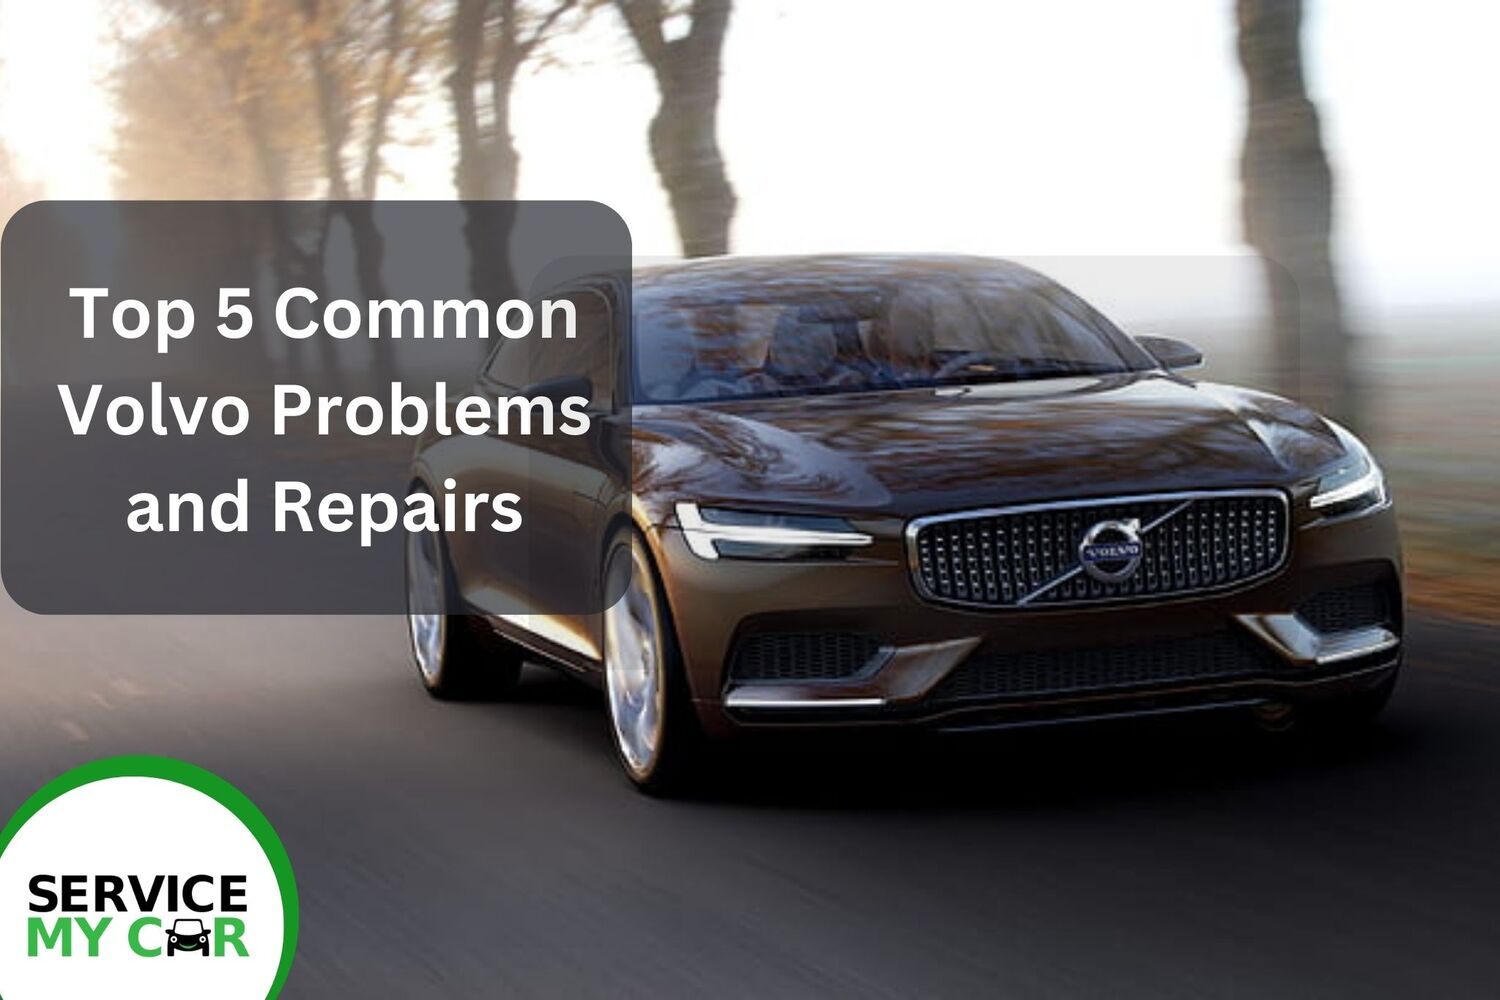 Top 5 Common Volvo Problems and Repairs (3)